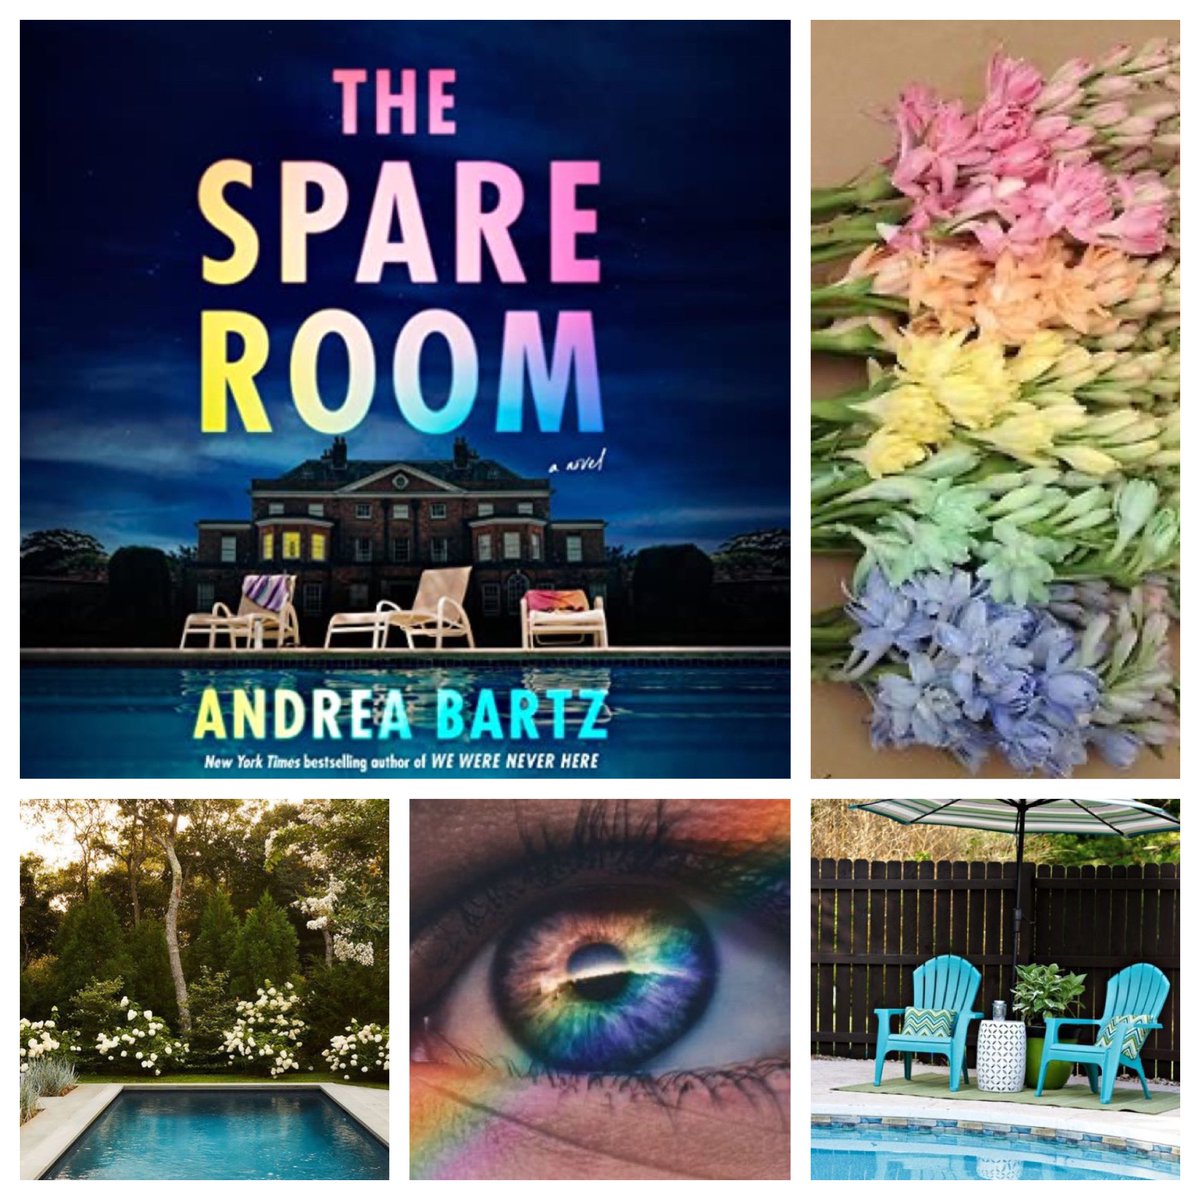 #AndreaBartz ‘s next book after #WeWereNeverHere (a #ReesesBookClub selection) is #TheSpareRoom, coming in June from #RandomHouse #Ballantine ! #NetGalley #BookTwitter